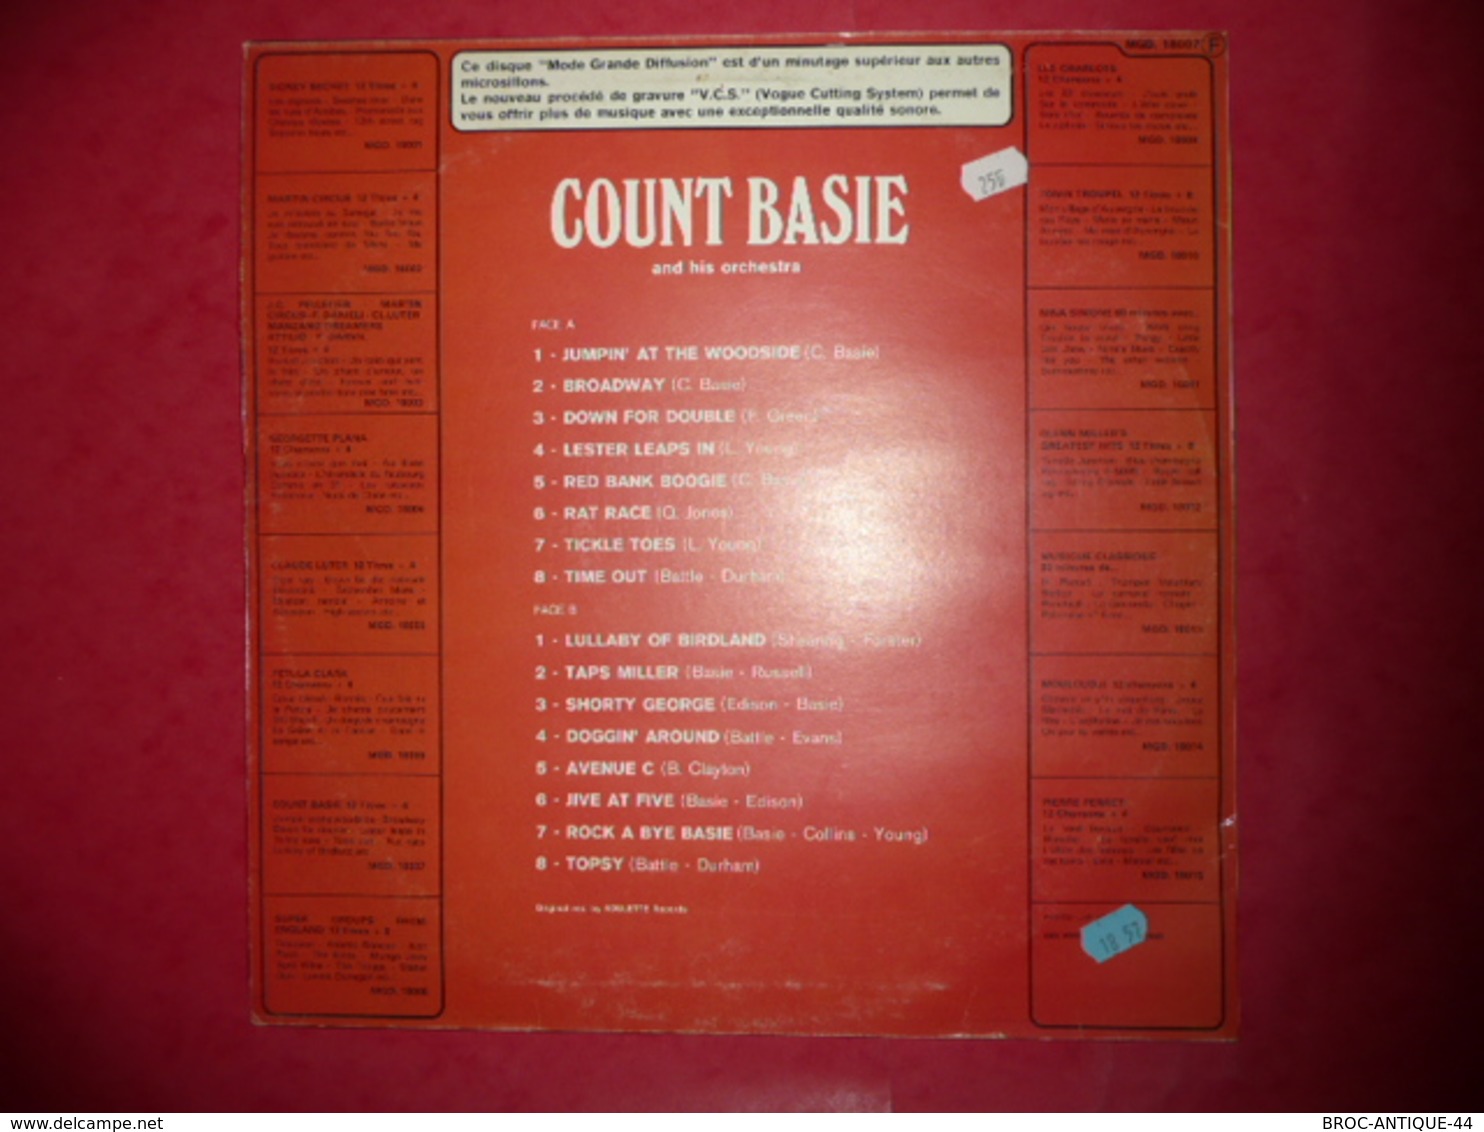 LP33 N°563 - COUNT BASIE AND HIS ORCHESTRA - COMPILATION 16 TITRES - Jazz